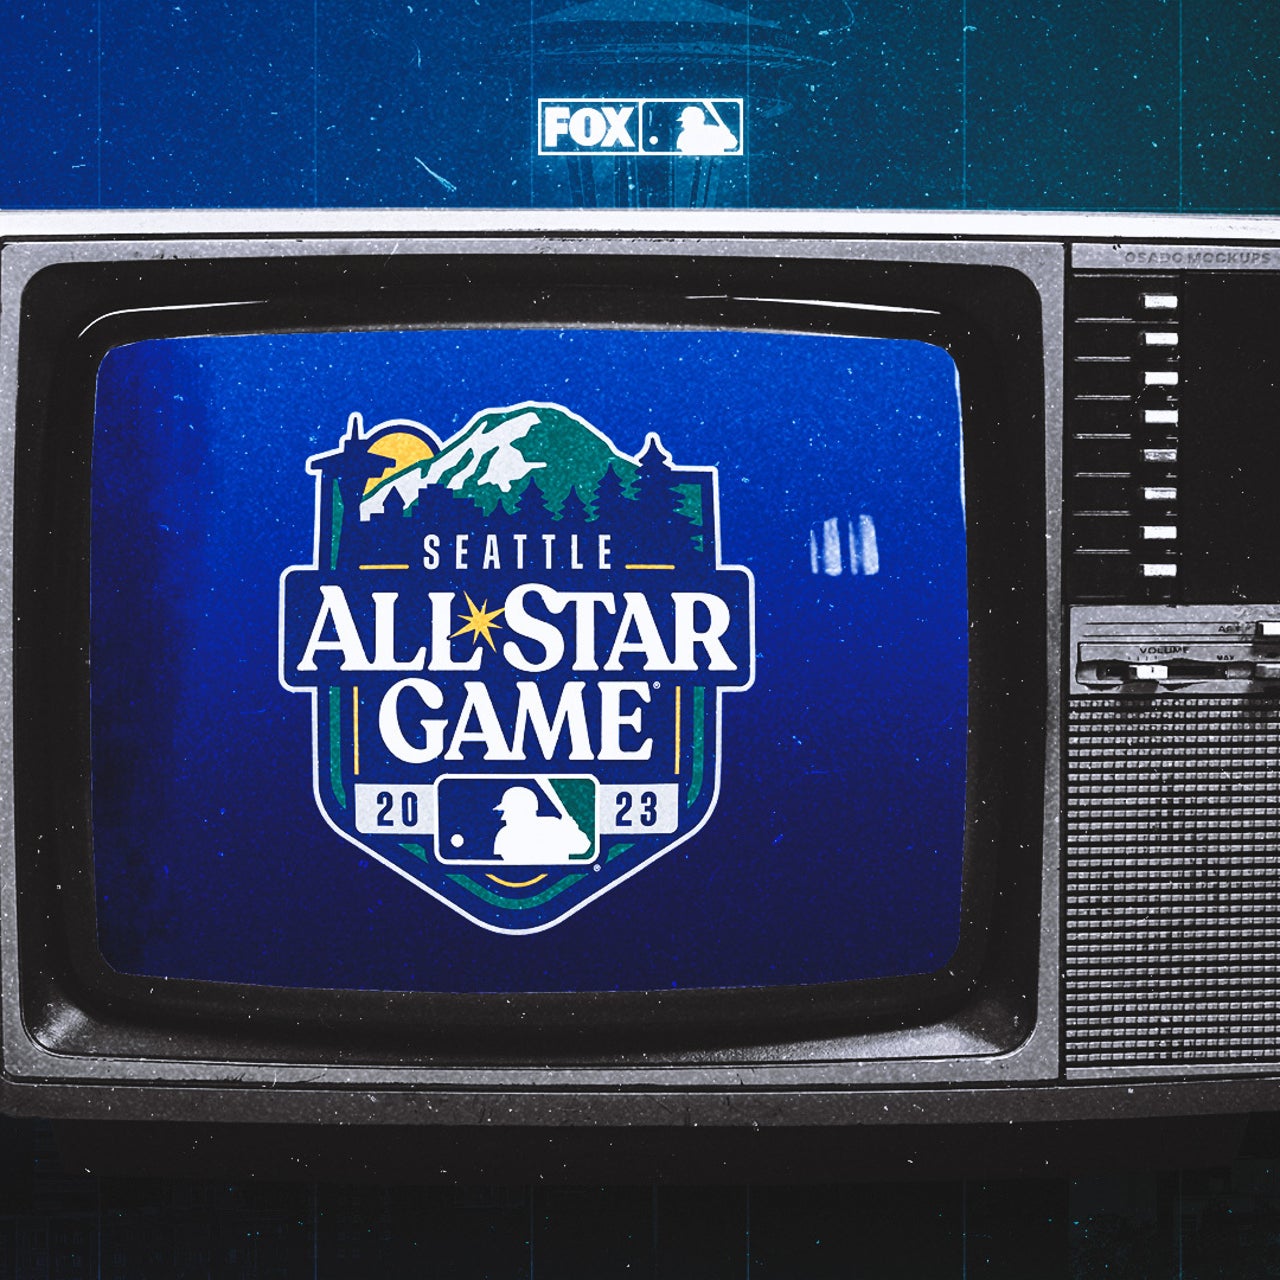 How to watch MLB Home Run Derby 2023 and All-Star Game on TV